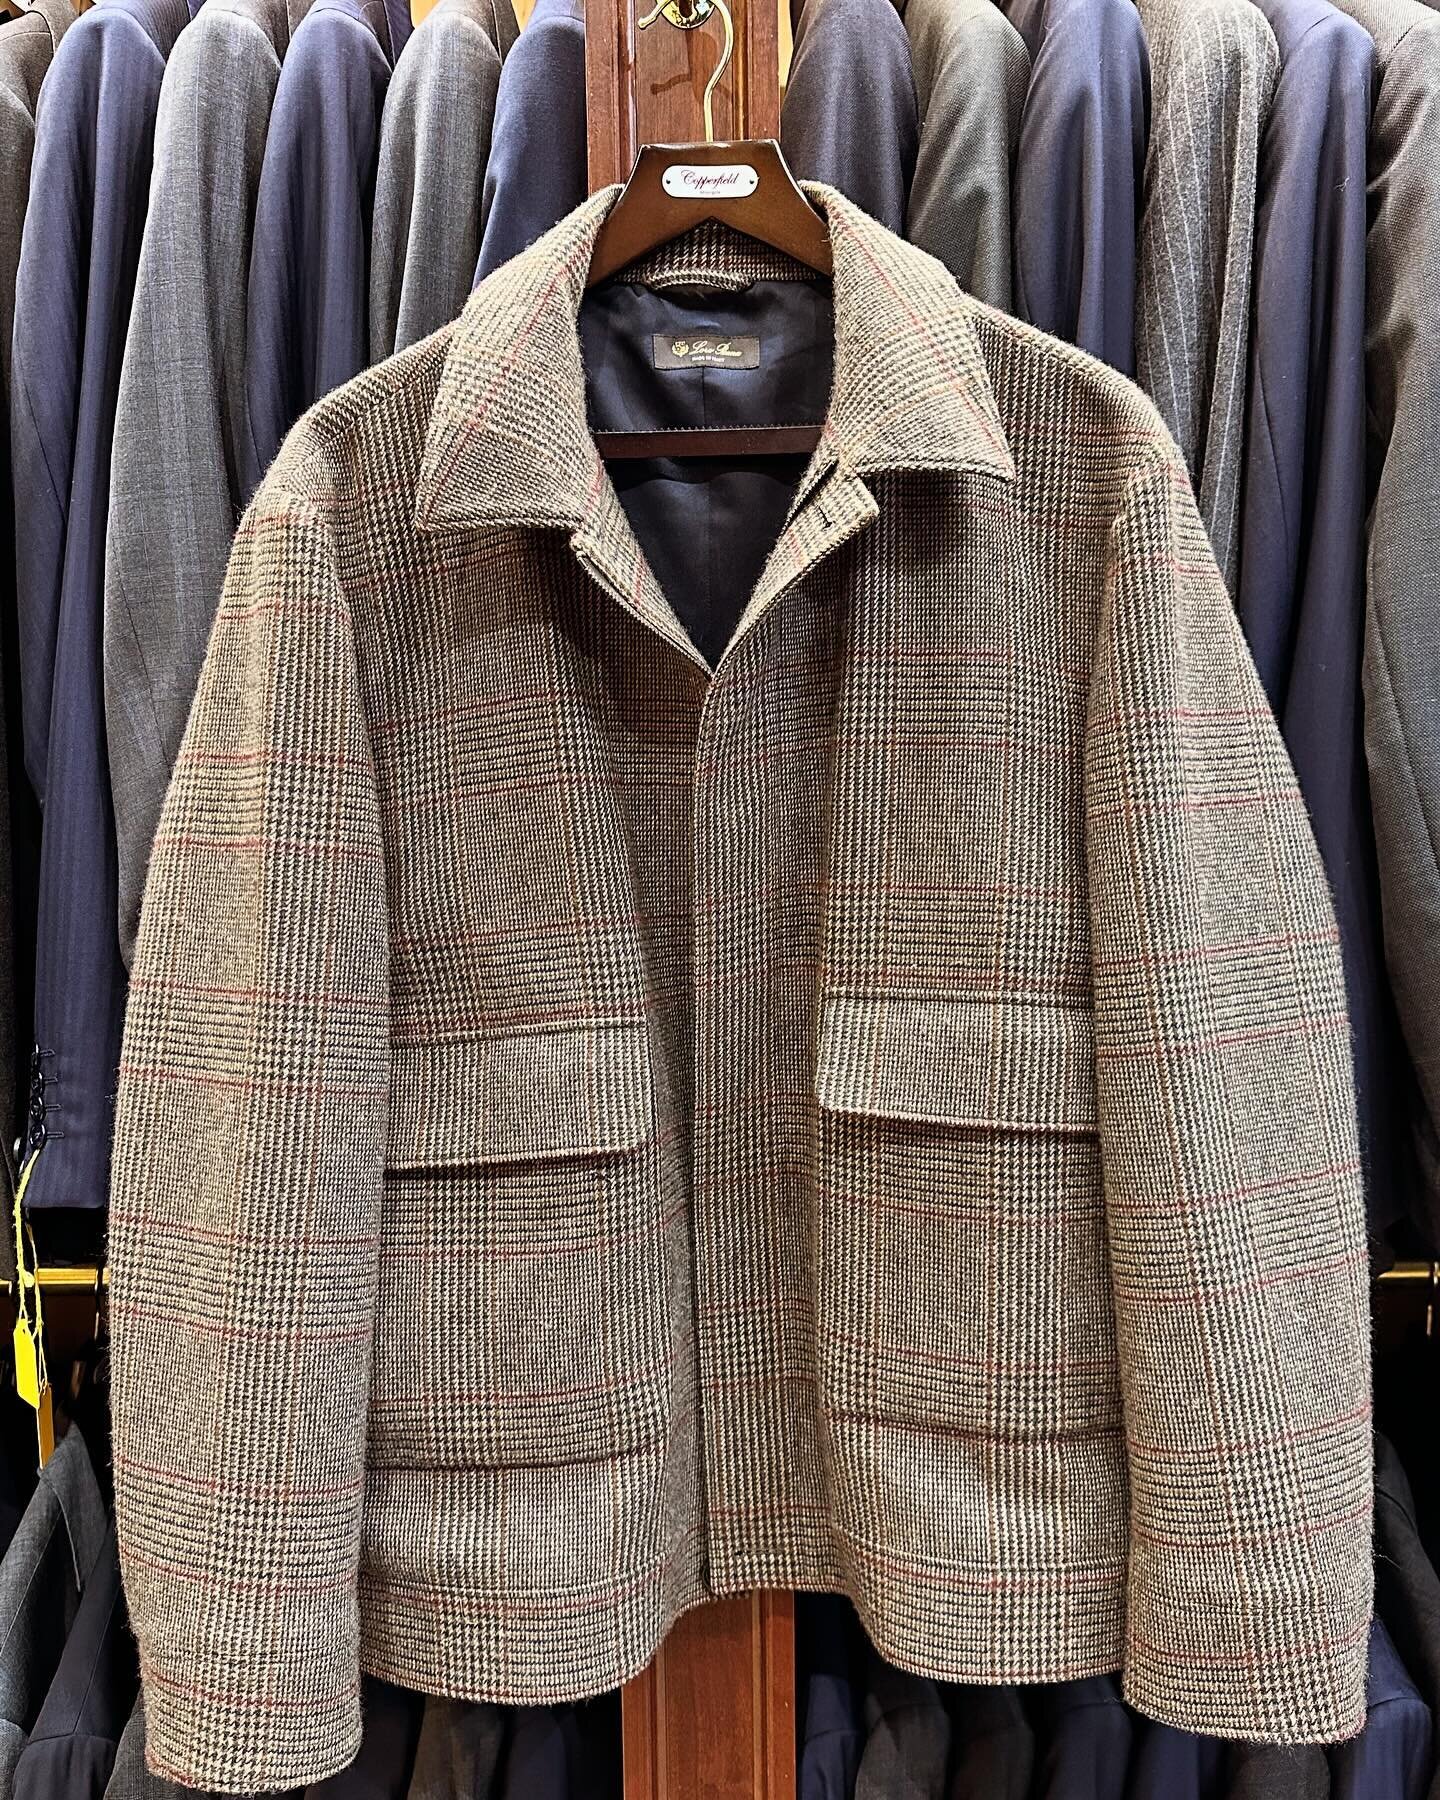 After excessive weight loss we are slowly working through this clients wardrobe.  This week we were tasked with re-sizing this Loro Piana Cashmere Jacket.  We also shortened the sleeves.
Now the client can start enjoying this fabulous jacket.
.
.
.
.